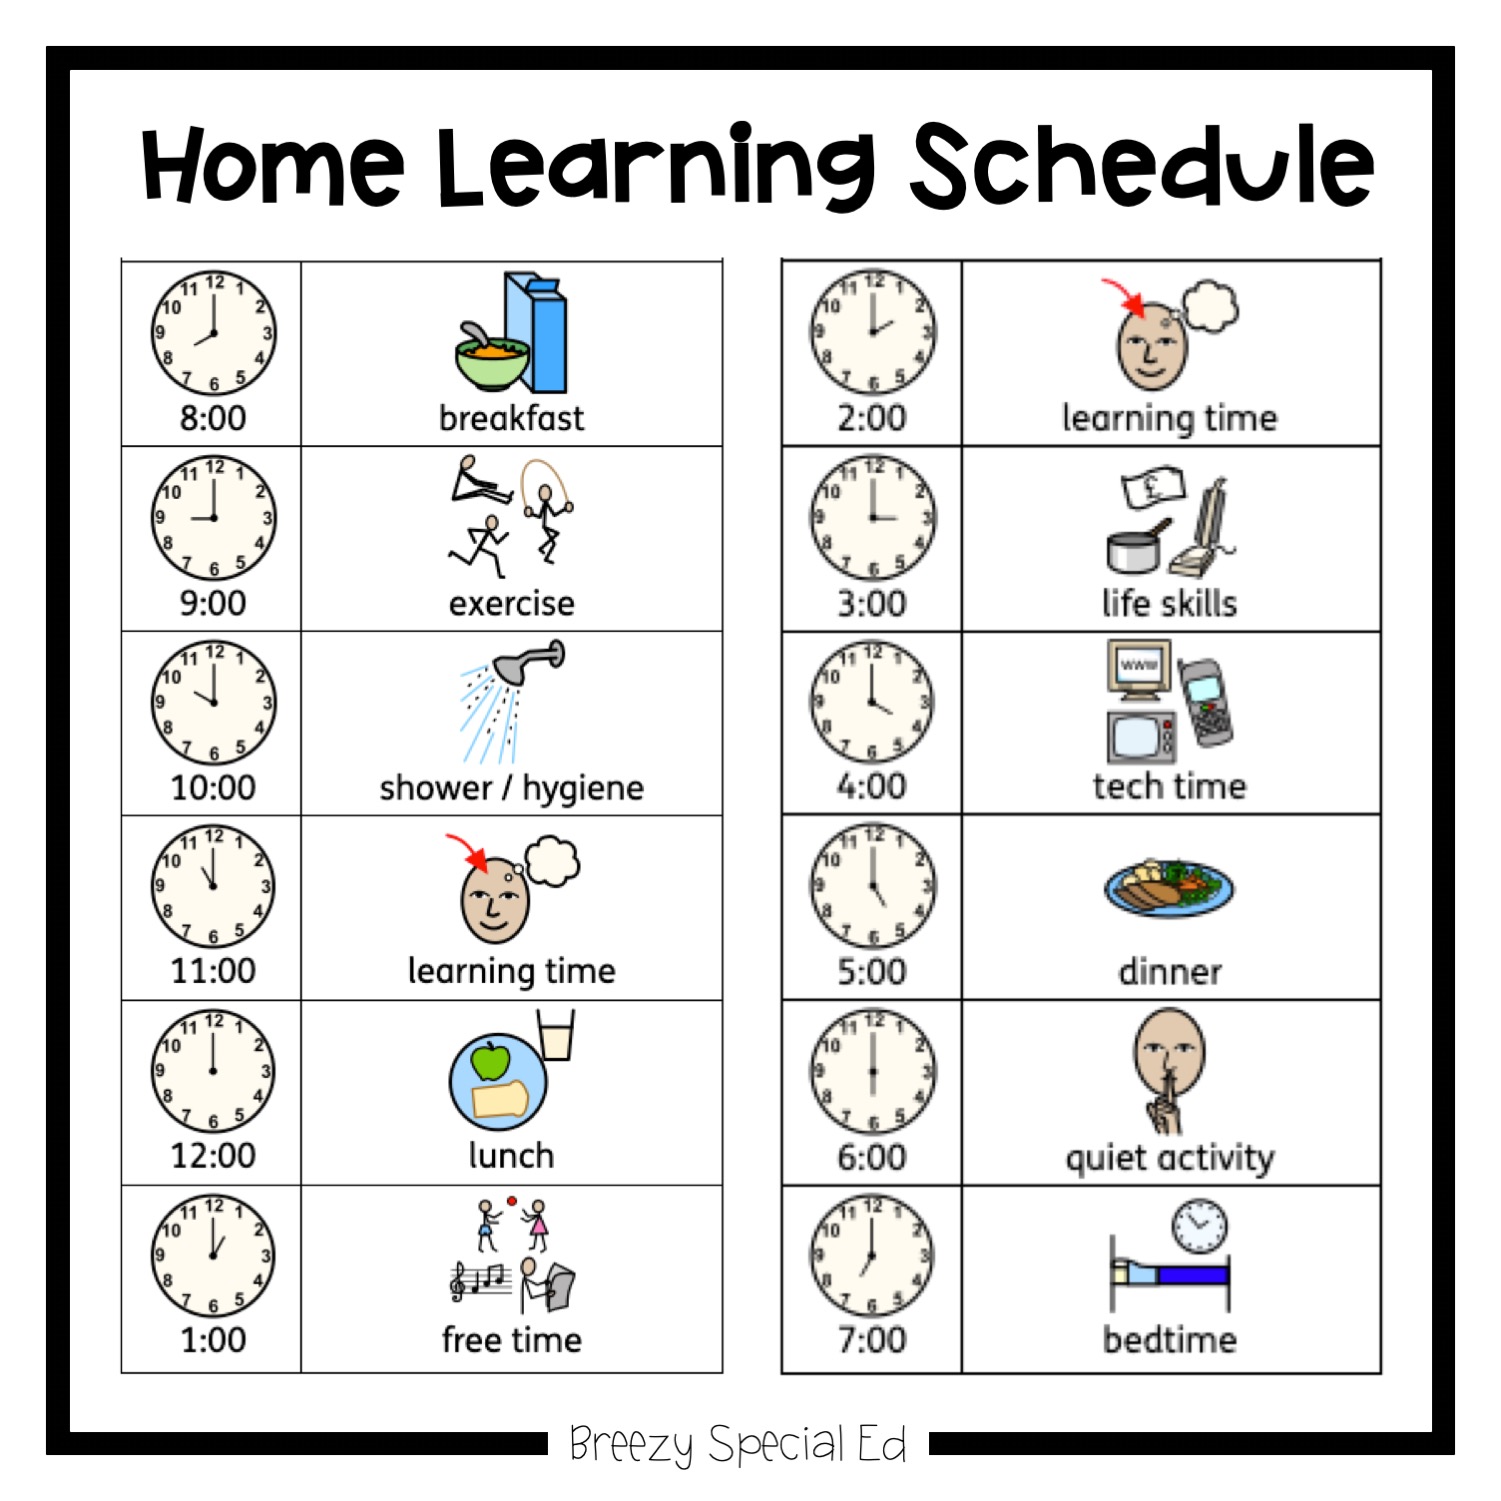 homework for special needs students